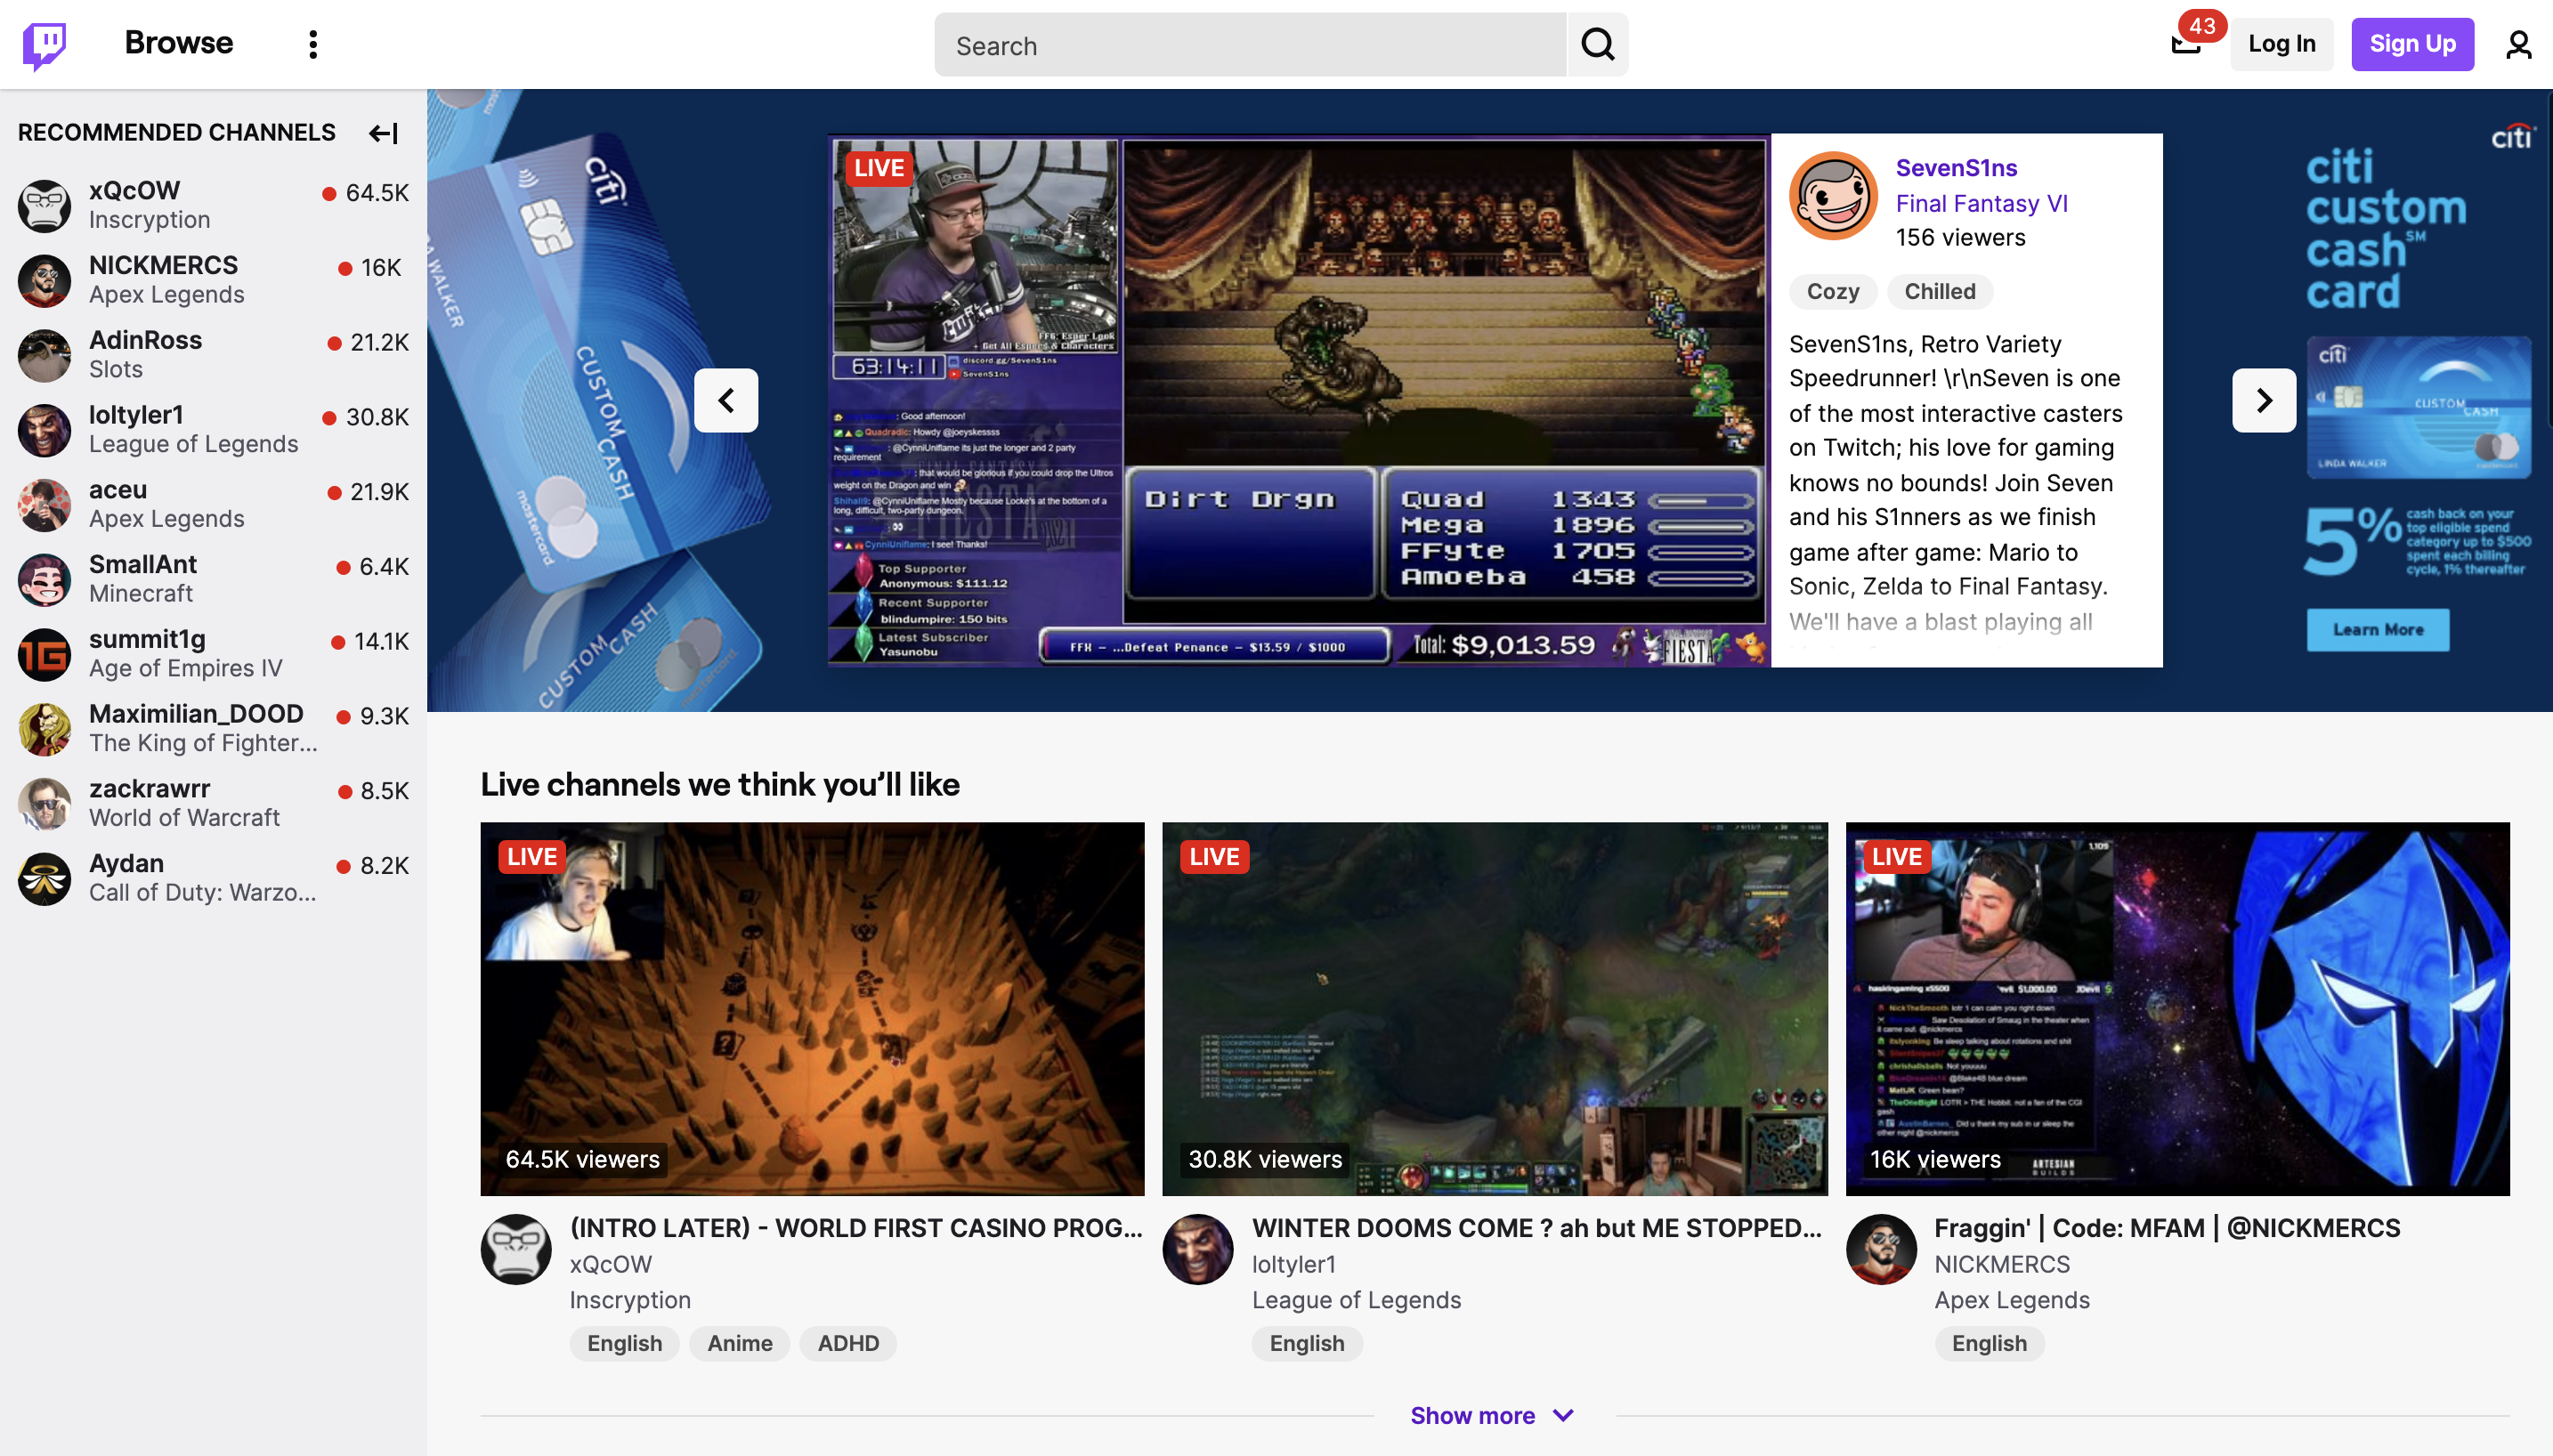 Video game live streaming on Twitch